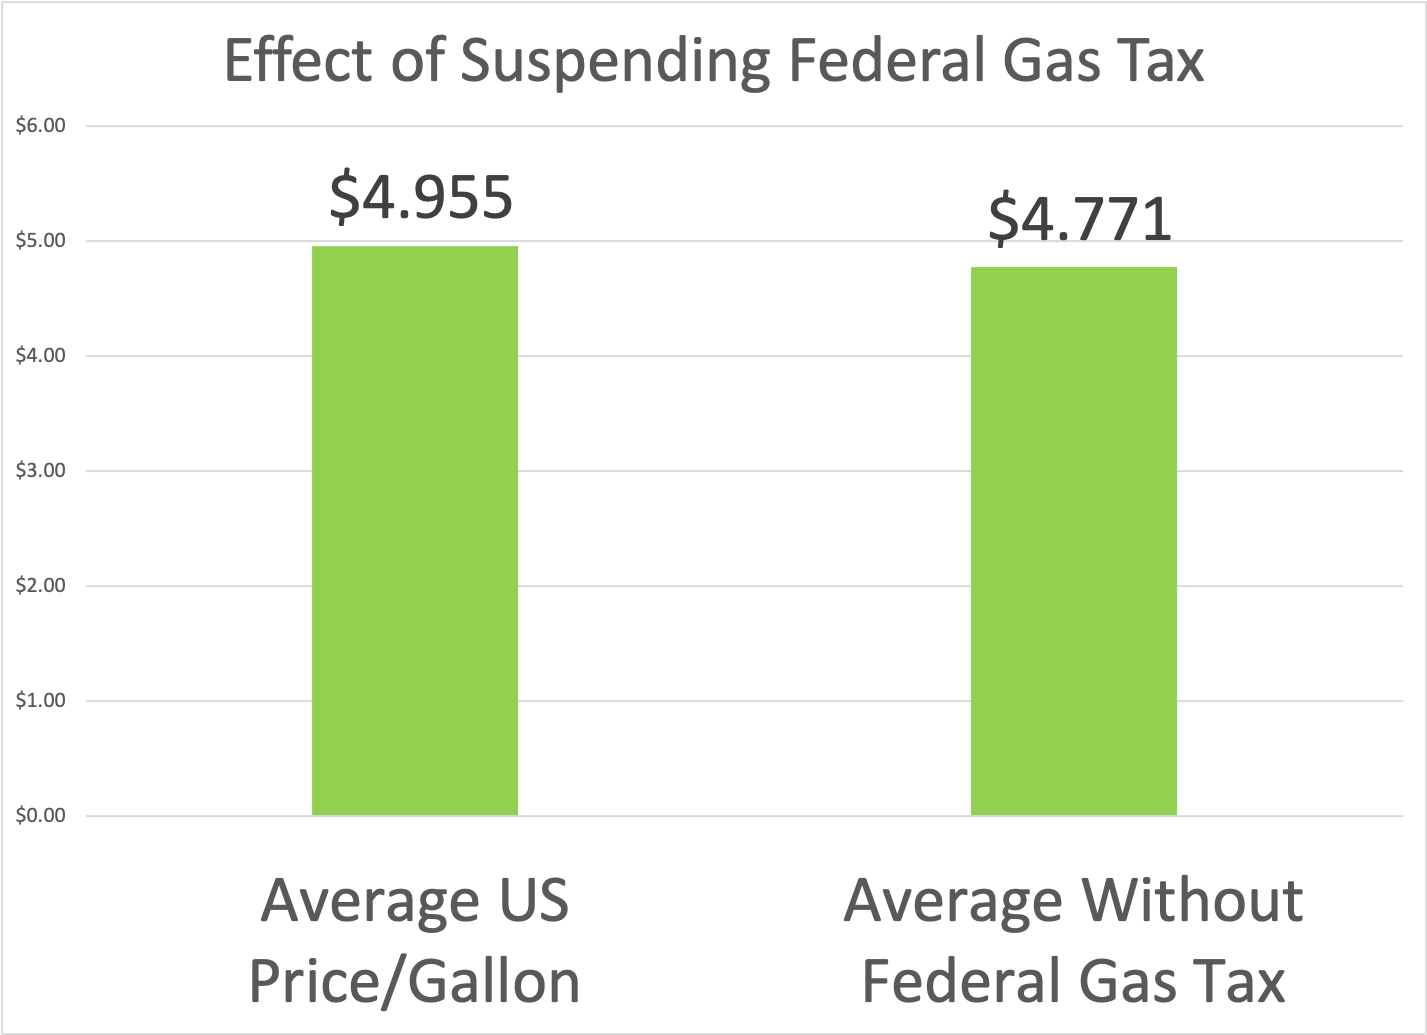 How much difference would it make to suspend the Federal Gas Tax?